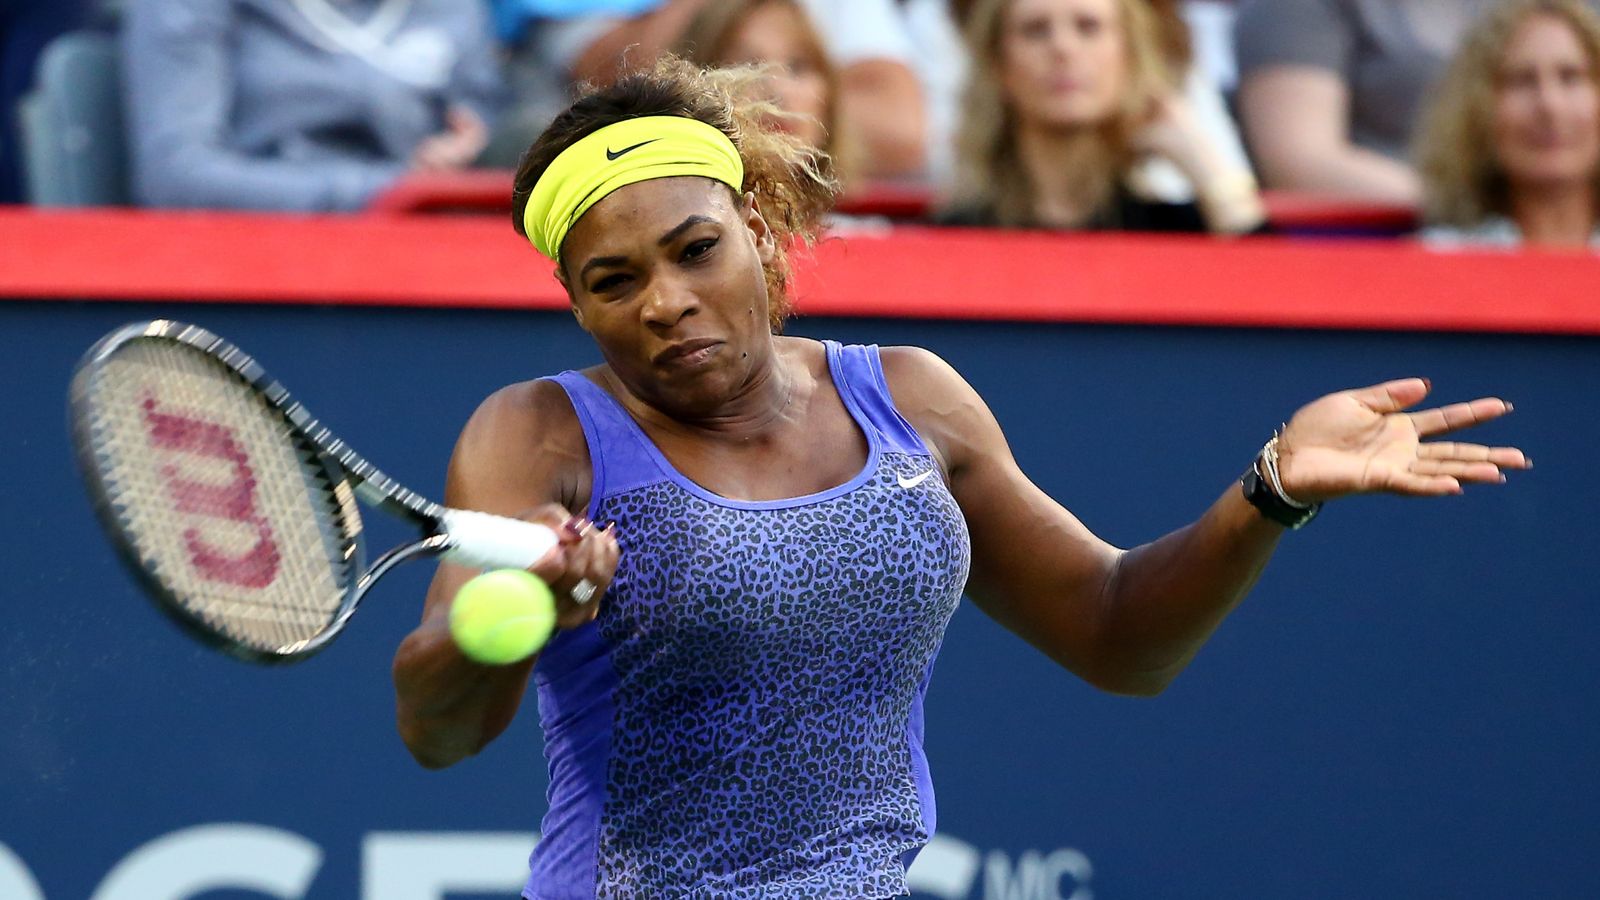 WTA Rogers Cup Serena Williams storms past Samantha Stosur; Petra